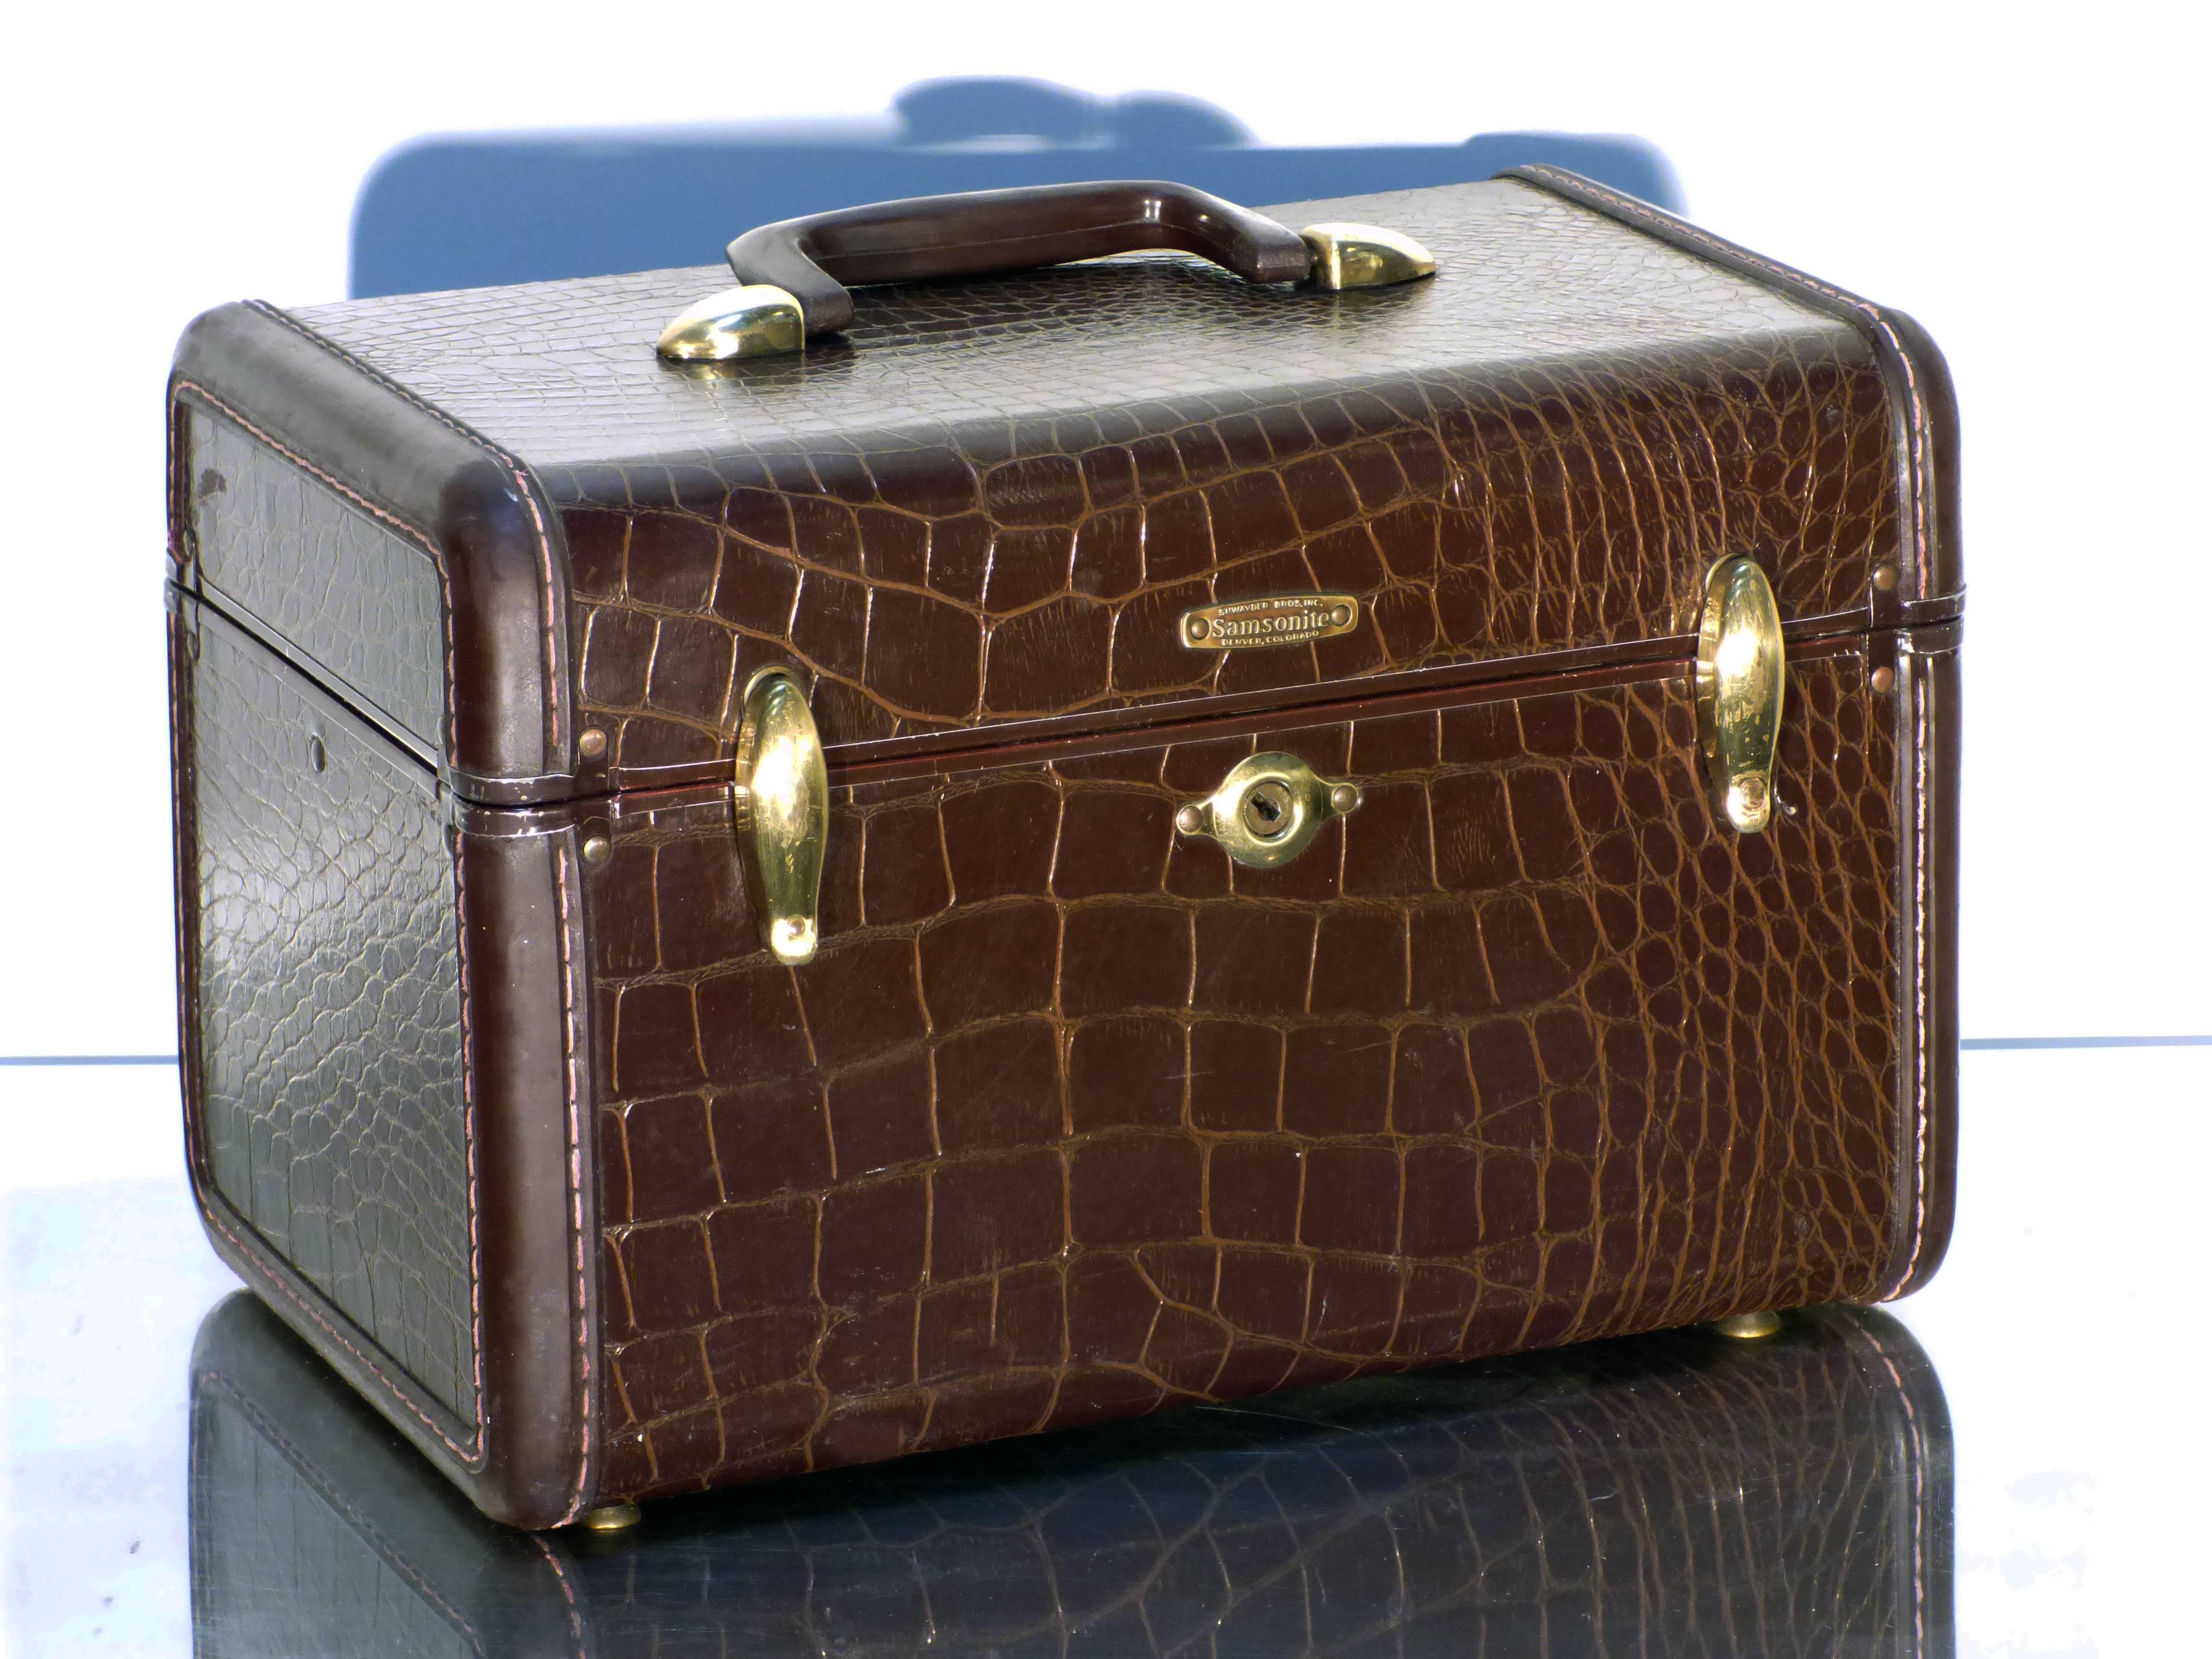 Leather suitcase in embossed-crocodile leather with brass appointments. Clean interior and barley used. We have more Samsonite suitcases in our storefront and we'll upload more soon.

For shipping costs, just send us a short message & we'll make